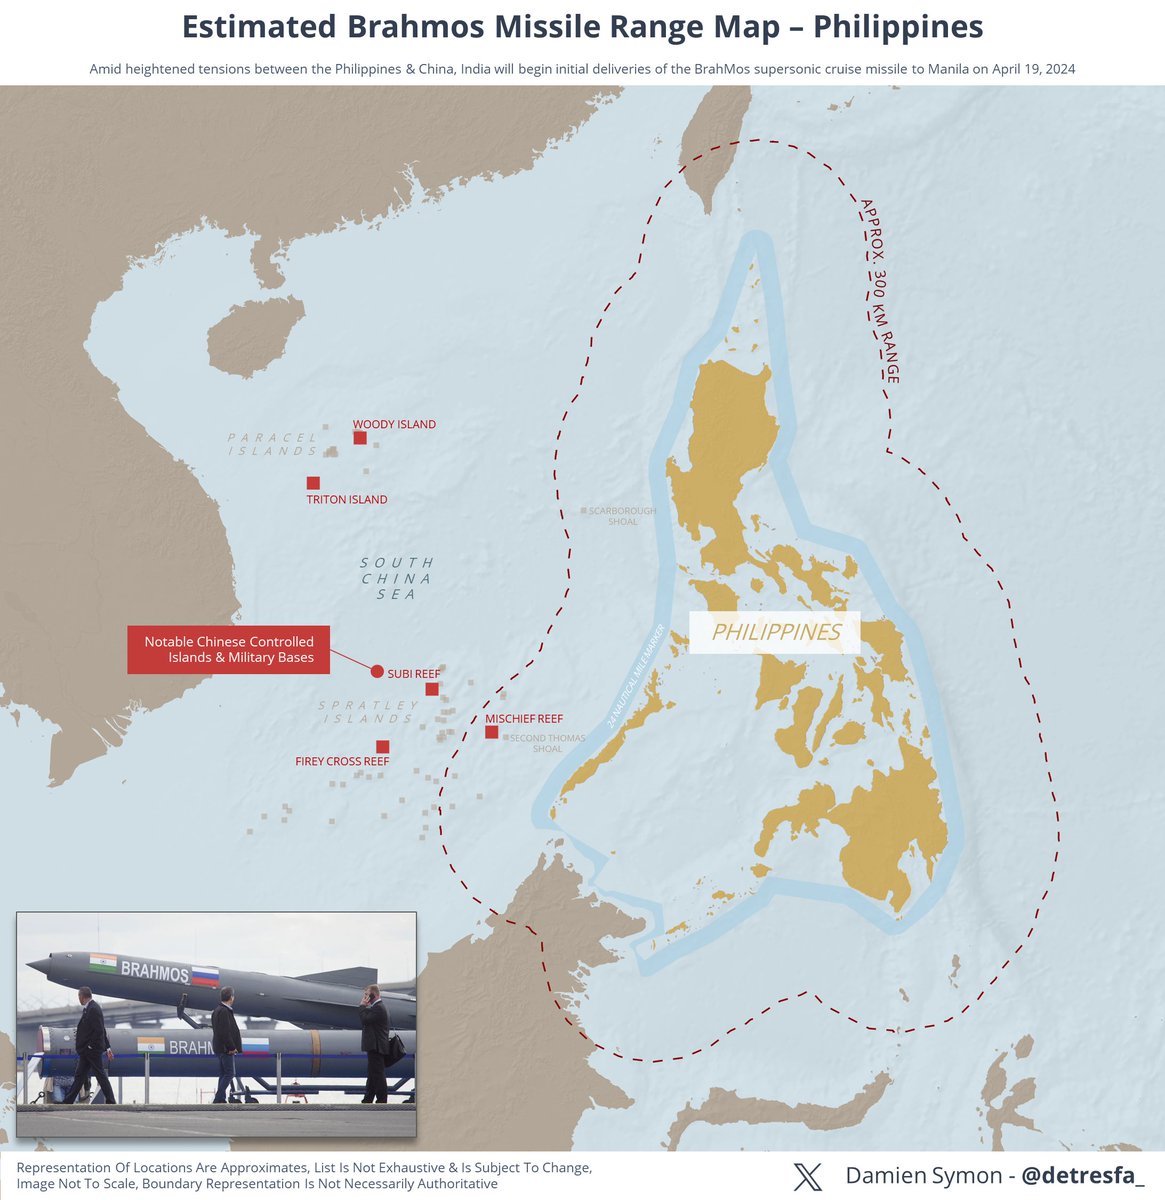 Bringing a significant boost to Philippine's coastal defense capabilities, India is set to deliver an initial batch of the Brahmos missile system to Manila today, here's a rough visual outlining the range of missile around the country & in the South China Sea